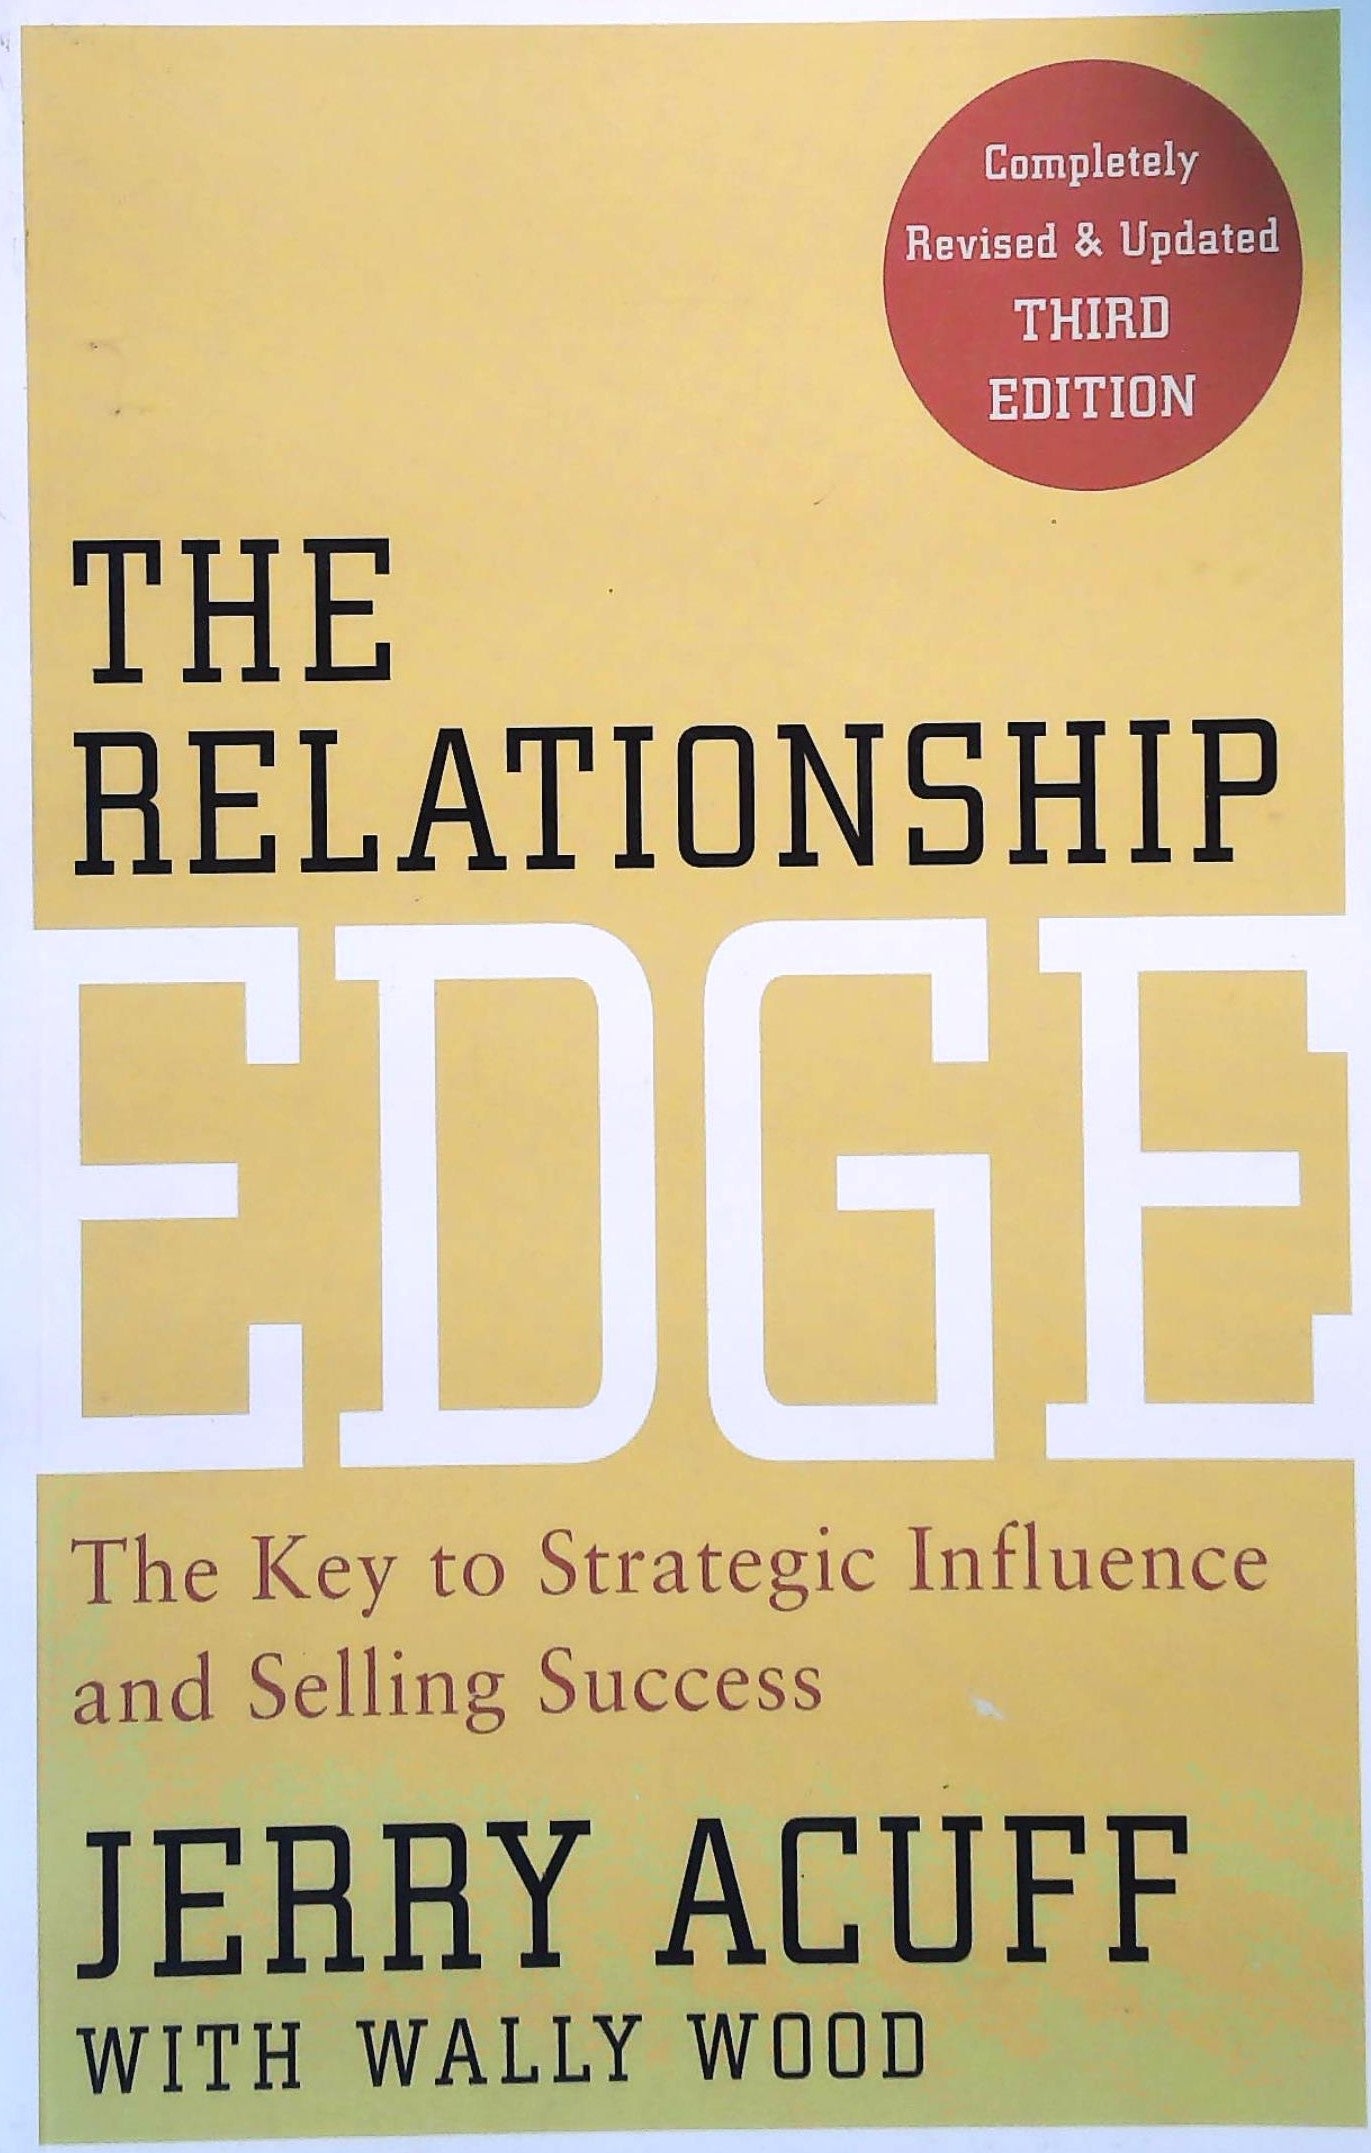 Livre ISBN 0470915471 The Relationship Edge: The Key to Strategic Influence and Selling Success (Jerry Axuff)